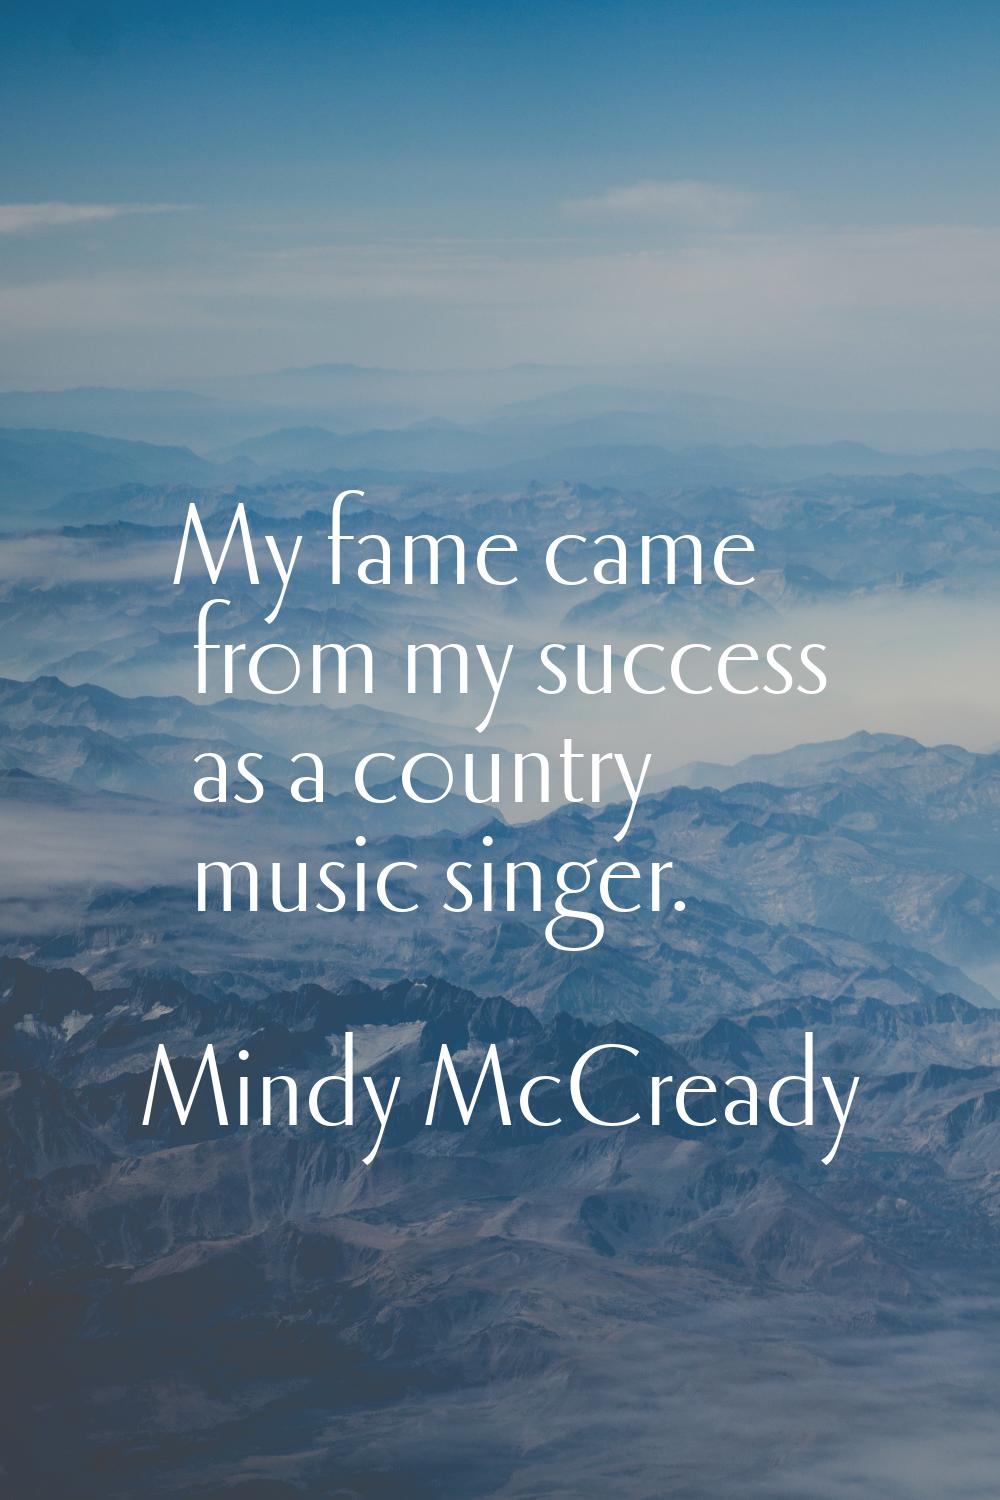 My fame came from my success as a country music singer.